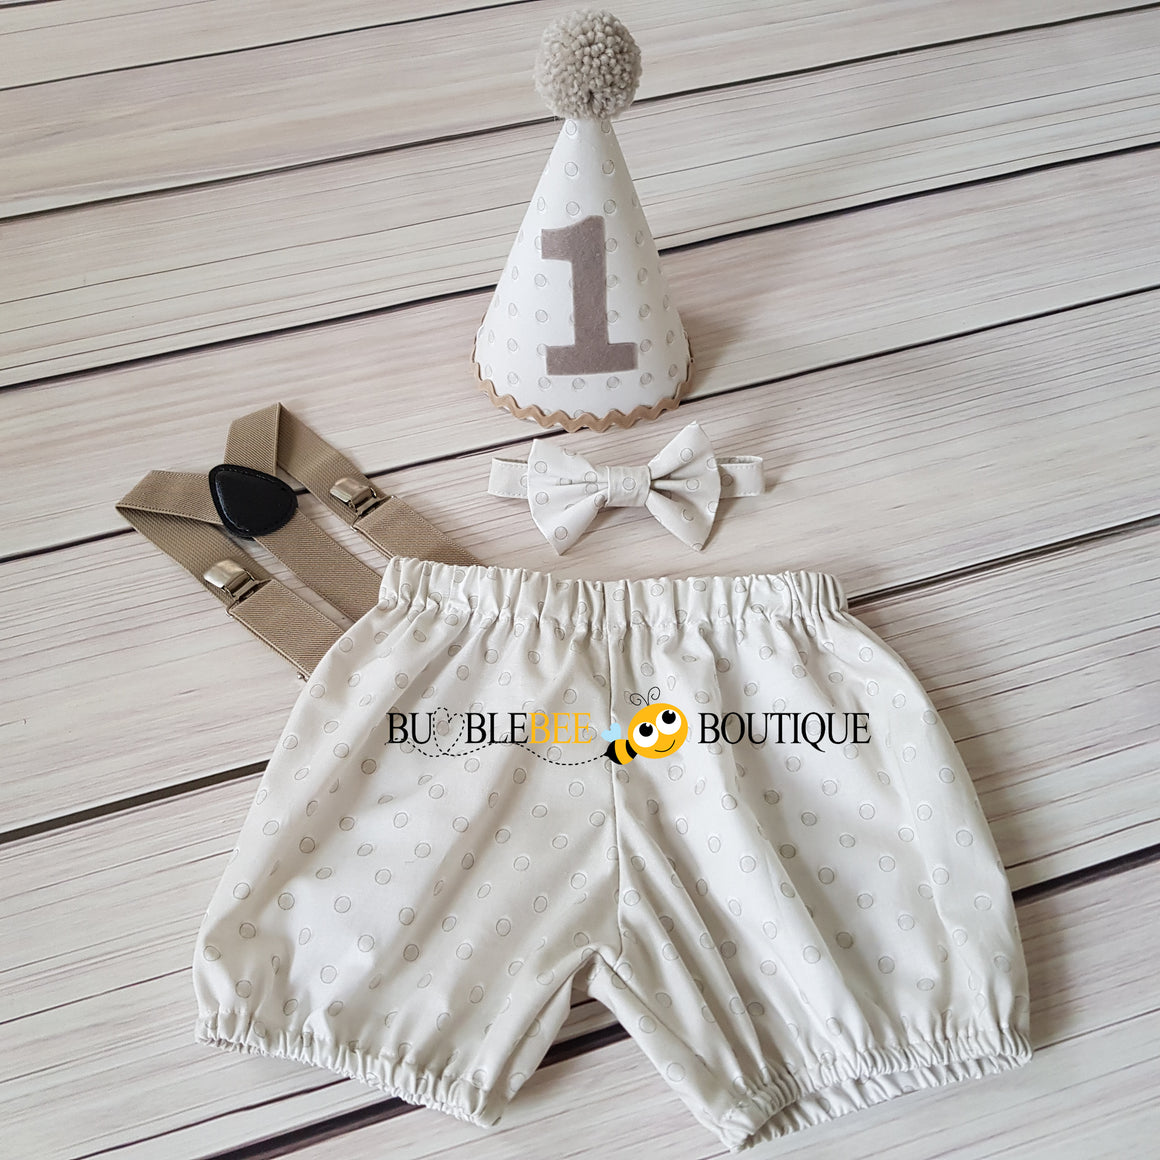 Hobnail Dots Cake Smash Outfit in beige